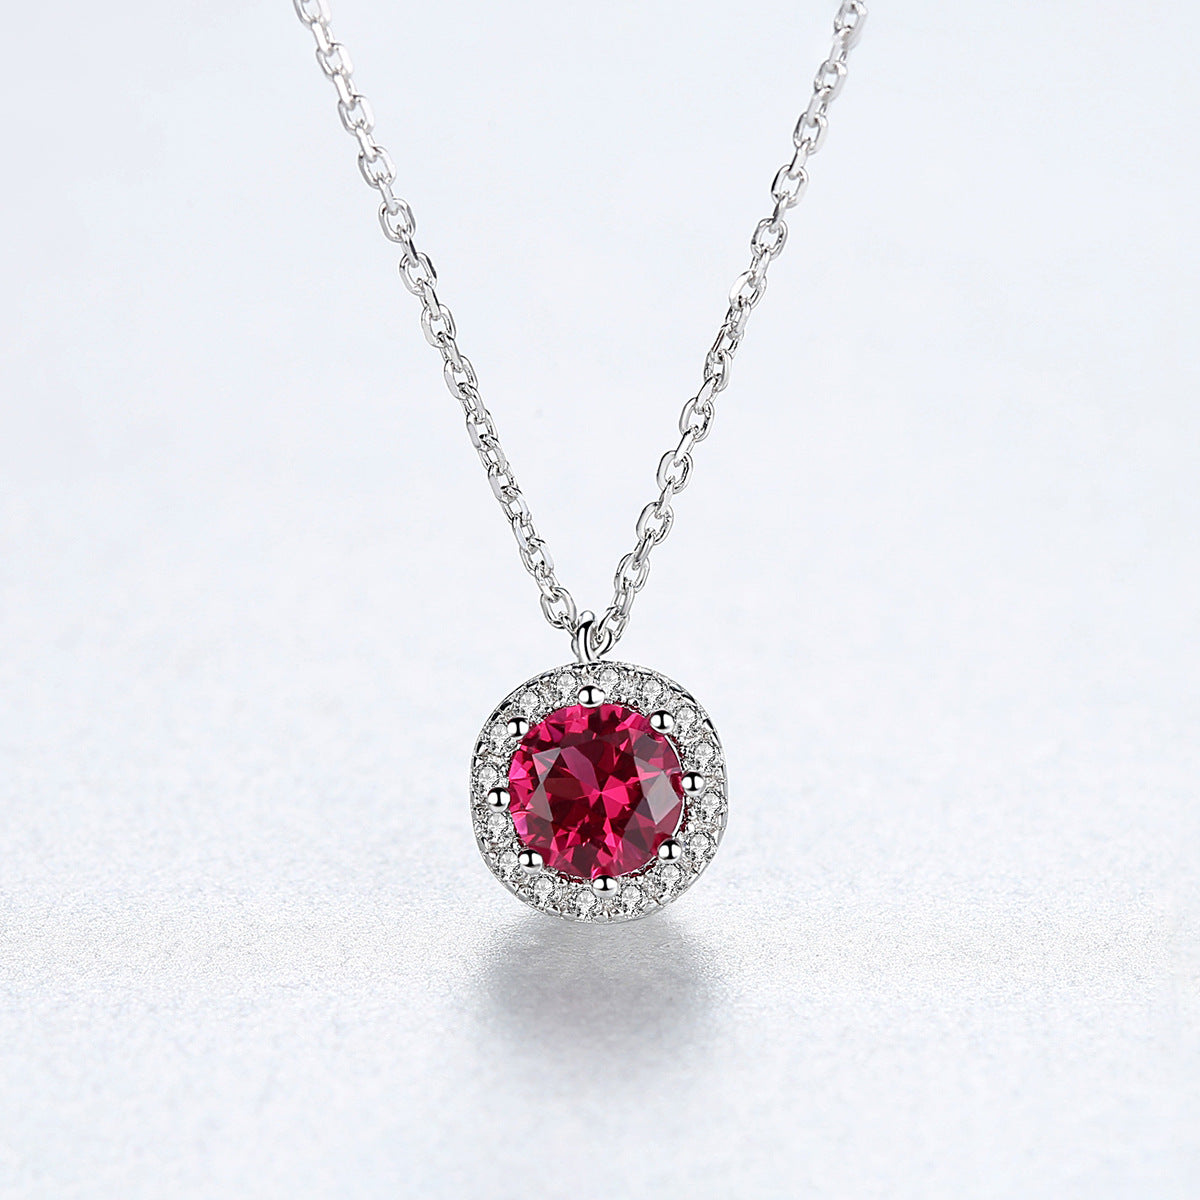 Gemstonely- S925 Silver Necklace with Simulate Ruby Pendant in Simple and Fashionable  Style